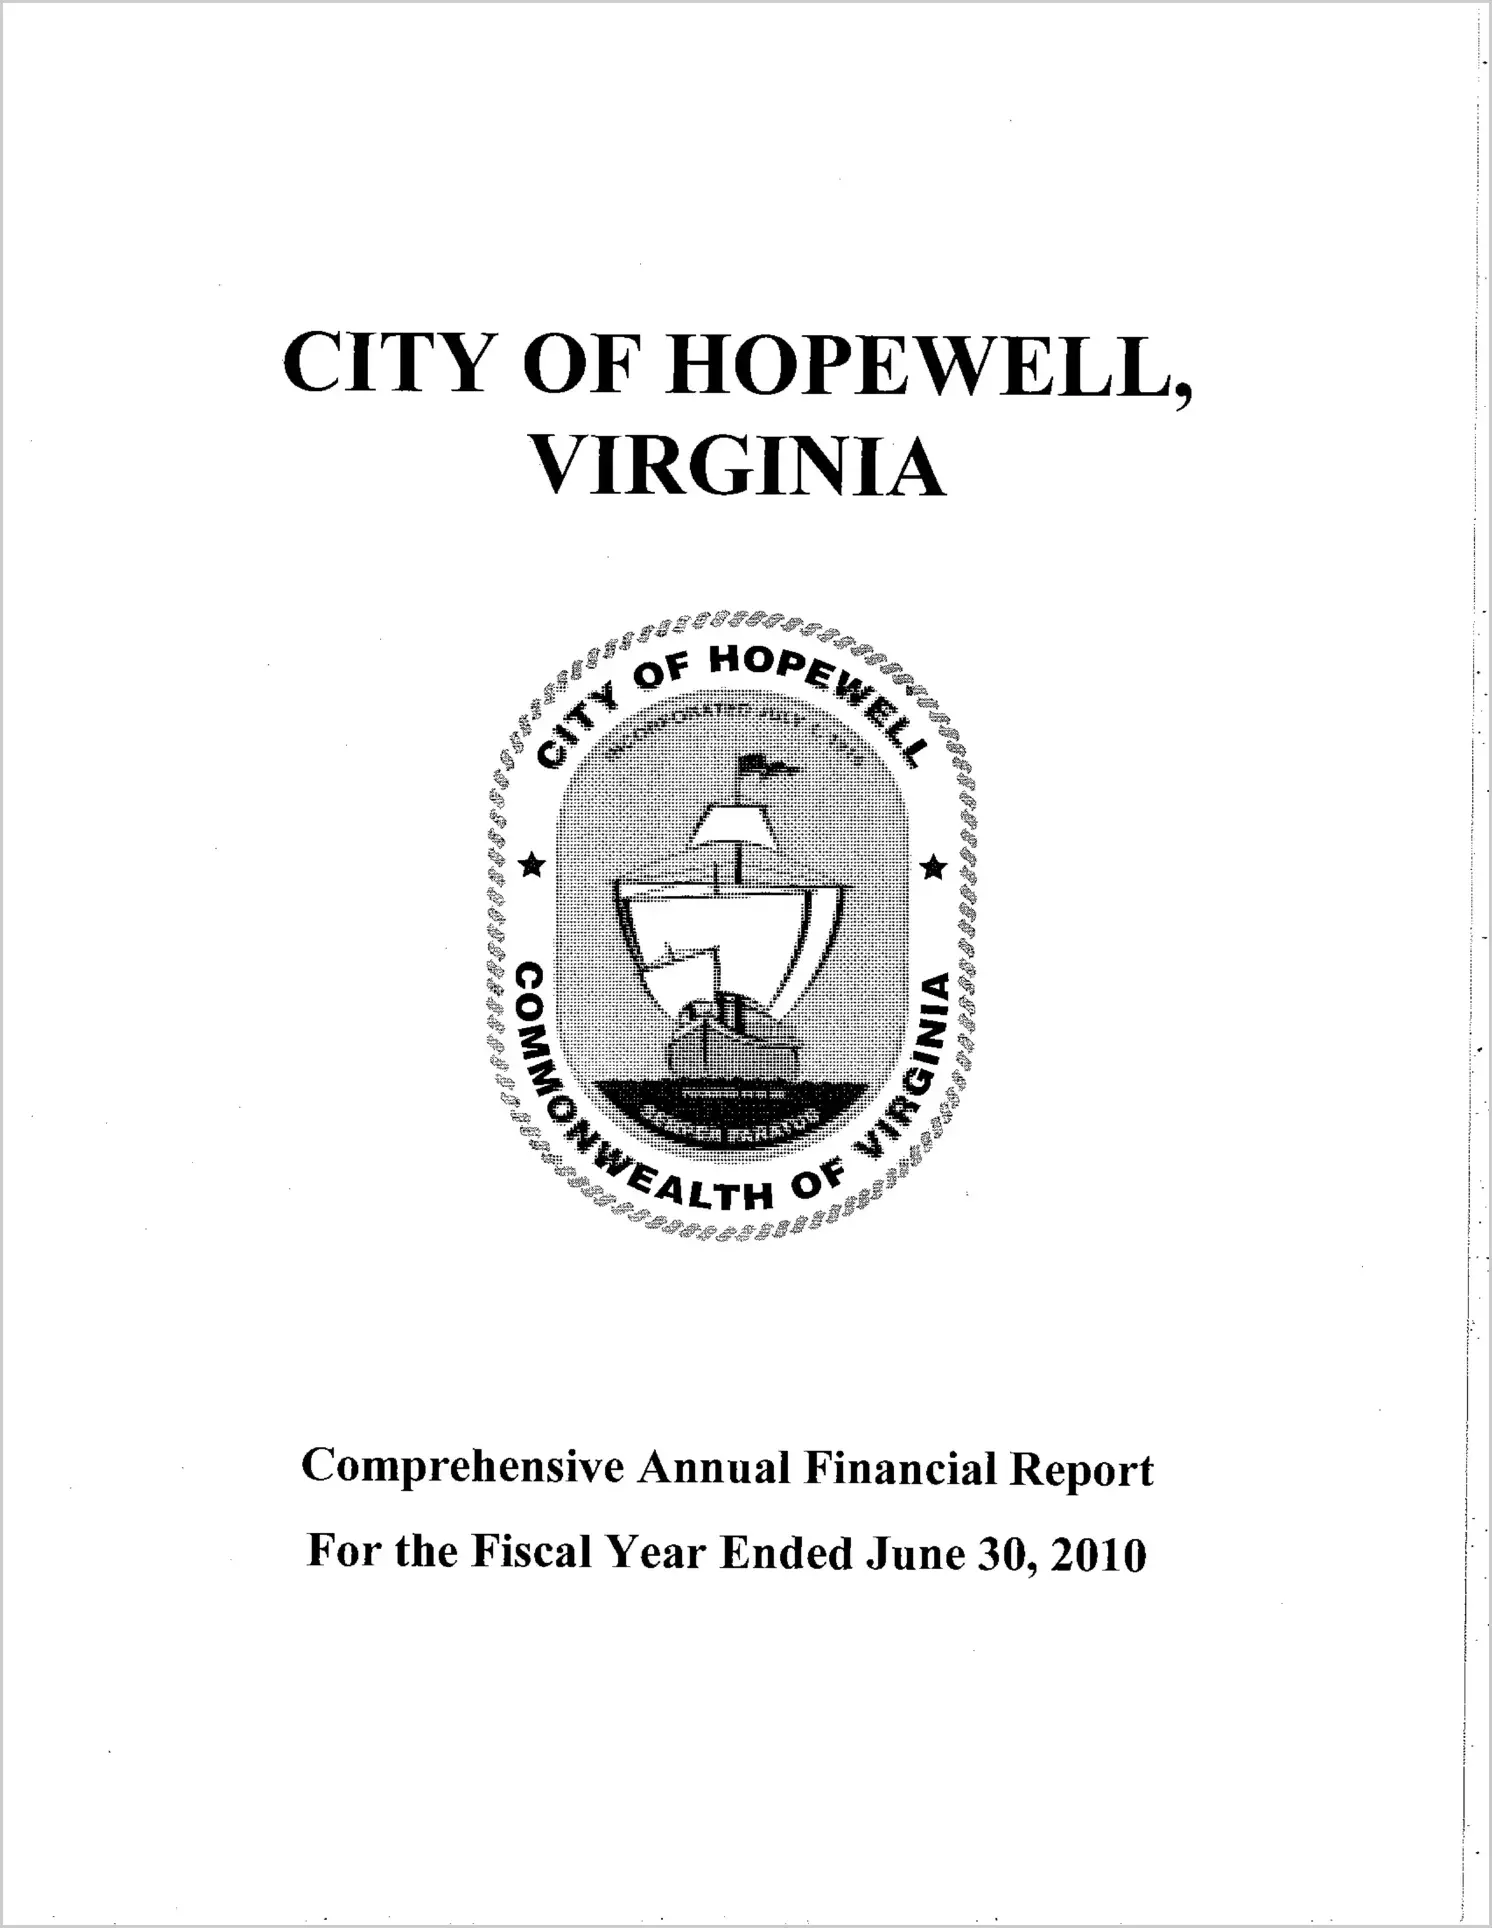 2010 Annual Financial Report for City of Hopewell